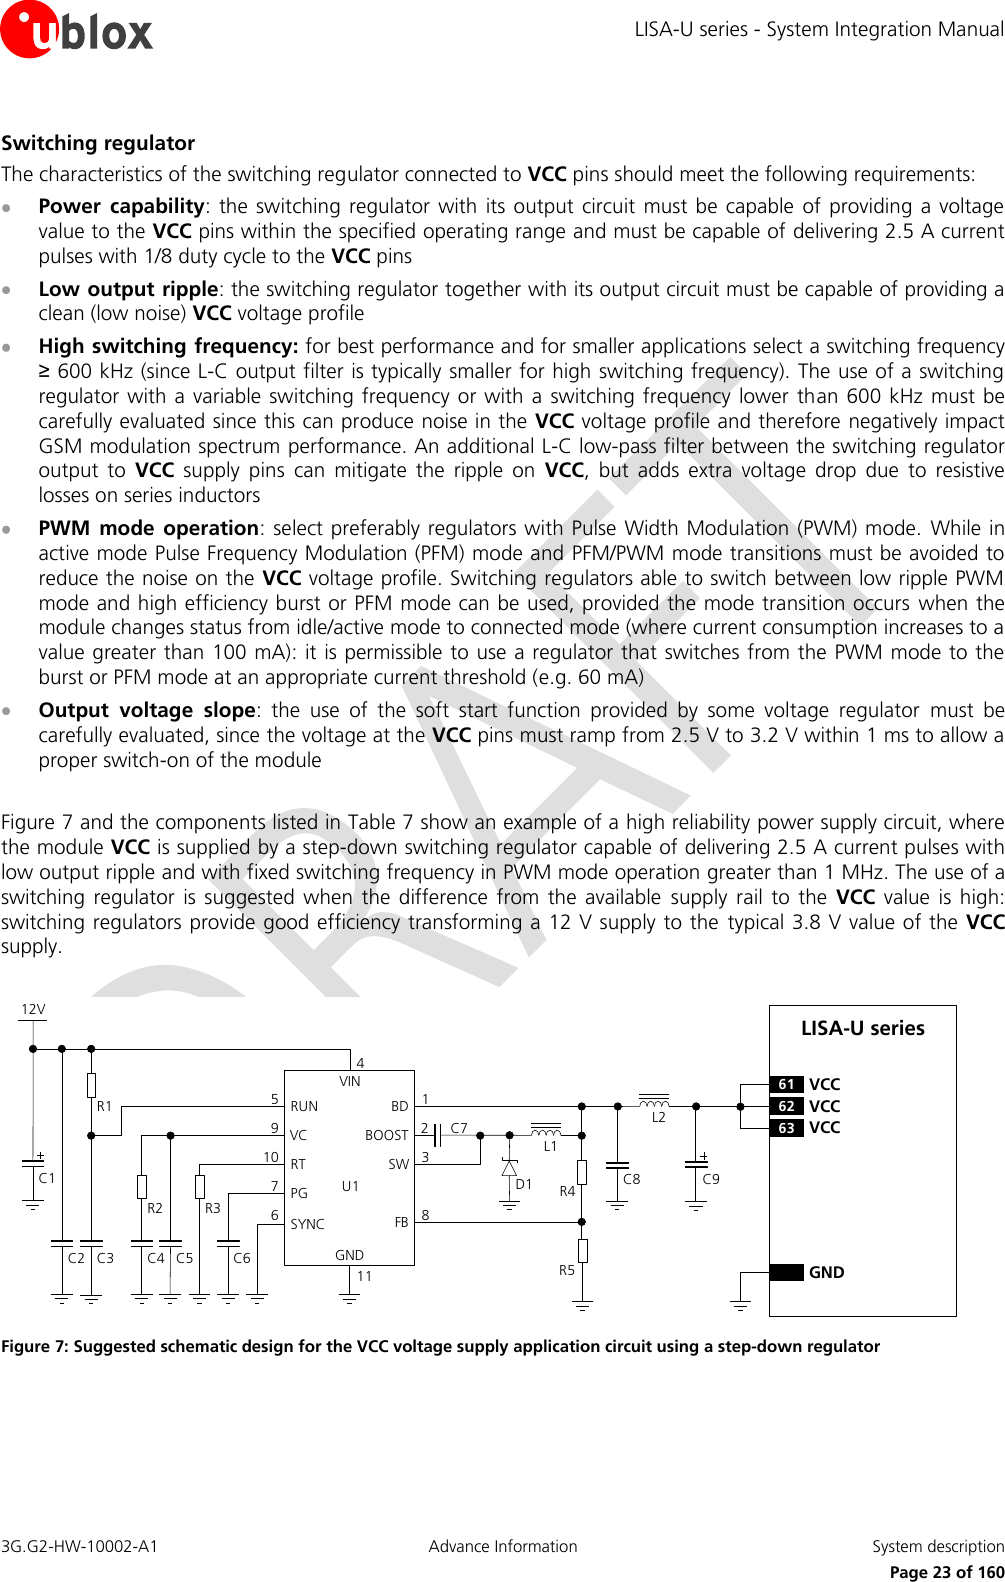 LISA-U series - System Integration Manual 3G.G2-HW-10002-A1  Advance Information  System description      Page 23 of 160 Switching regulator The characteristics of the switching regulator connected to VCC pins should meet the following requirements:  Power  capability:  the switching  regulator with  its output circuit must  be capable of  providing a  voltage value to the VCC pins within the specified operating range and must be capable of delivering 2.5 A current pulses with 1/8 duty cycle to the VCC pins  Low output ripple: the switching regulator together with its output circuit must be capable of providing a clean (low noise) VCC voltage profile  High switching frequency: for best performance and for smaller applications select a switching frequency ≥ 600 kHz (since L-C output filter is typically smaller for high switching frequency). The use of a switching regulator with a variable switching frequency  or  with a switching frequency  lower than 600  kHz must  be carefully evaluated since this can produce noise in the VCC voltage profile and therefore negatively impact GSM modulation spectrum performance. An additional L-C low-pass filter between the switching regulator output  to  VCC  supply  pins  can  mitigate  the  ripple  on  VCC,  but  adds  extra  voltage  drop  due  to  resistive losses on series inductors  PWM  mode  operation: select preferably regulators with Pulse Width Modulation (PWM) mode.  While in active mode Pulse Frequency Modulation (PFM) mode and PFM/PWM mode transitions must be avoided to reduce the noise on the VCC voltage profile. Switching regulators able to switch between low ripple PWM mode and high efficiency burst or PFM mode can be used, provided the mode transition occurs  when the module changes status from idle/active mode to connected mode (where current consumption increases to a value greater than 100 mA): it is permissible to use a regulator that switches from the PWM mode to the burst or PFM mode at an appropriate current threshold (e.g. 60 mA)  Output  voltage  slope:  the  use  of  the  soft  start  function  provided  by  some  voltage  regulator  must  be carefully evaluated, since the voltage at the VCC pins must ramp from 2.5 V to 3.2 V within 1 ms to allow a proper switch-on of the module   Figure 7 and the components listed in Table 7 show an example of a high reliability power supply circuit, where the module VCC is supplied by a step-down switching regulator capable of delivering 2.5 A current pulses with low output ripple and with fixed switching frequency in PWM mode operation greater than 1 MHz. The use of a switching  regulator  is suggested  when the  difference  from  the  available  supply  rail  to the  VCC  value  is high: switching regulators provide good efficiency transforming a 12 V supply to the  typical 3.8 V value of the VCC supply.  LISA-U series12VC6R3C5R2C3C2C1R1VINRUNVCRTPGSYNCBDBOOSTSWFBGND671095C71238114C8 C9L2D1 R4R5L1C4U162 VCC63 VCC61 VCCGND Figure 7: Suggested schematic design for the VCC voltage supply application circuit using a step-down regulator 